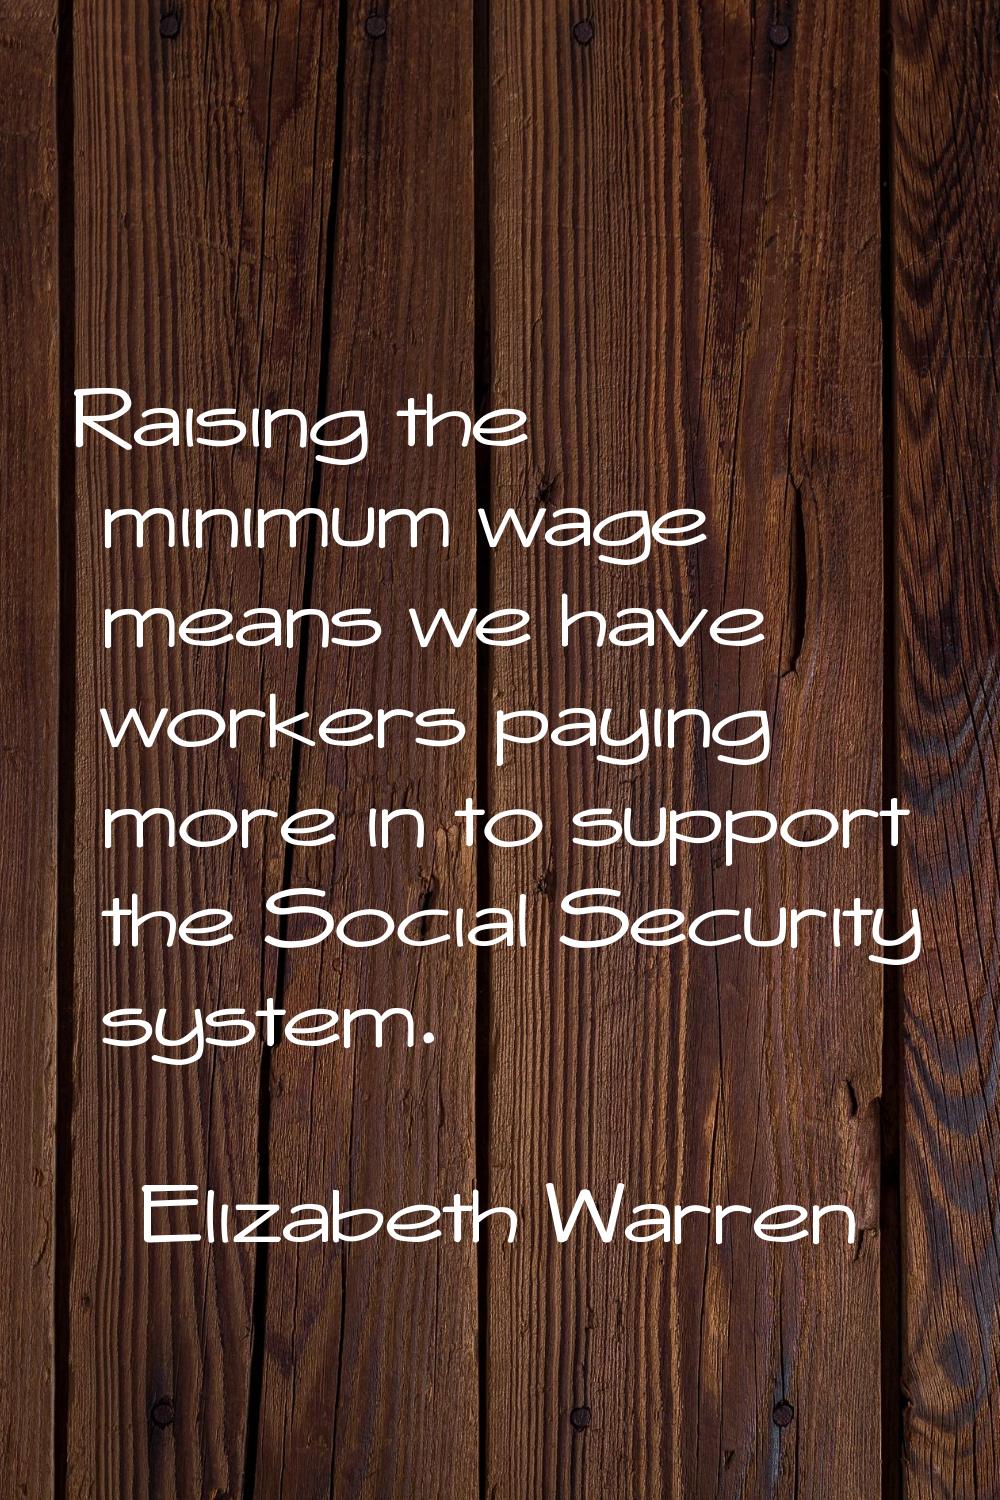 Raising the minimum wage means we have workers paying more in to support the Social Security system